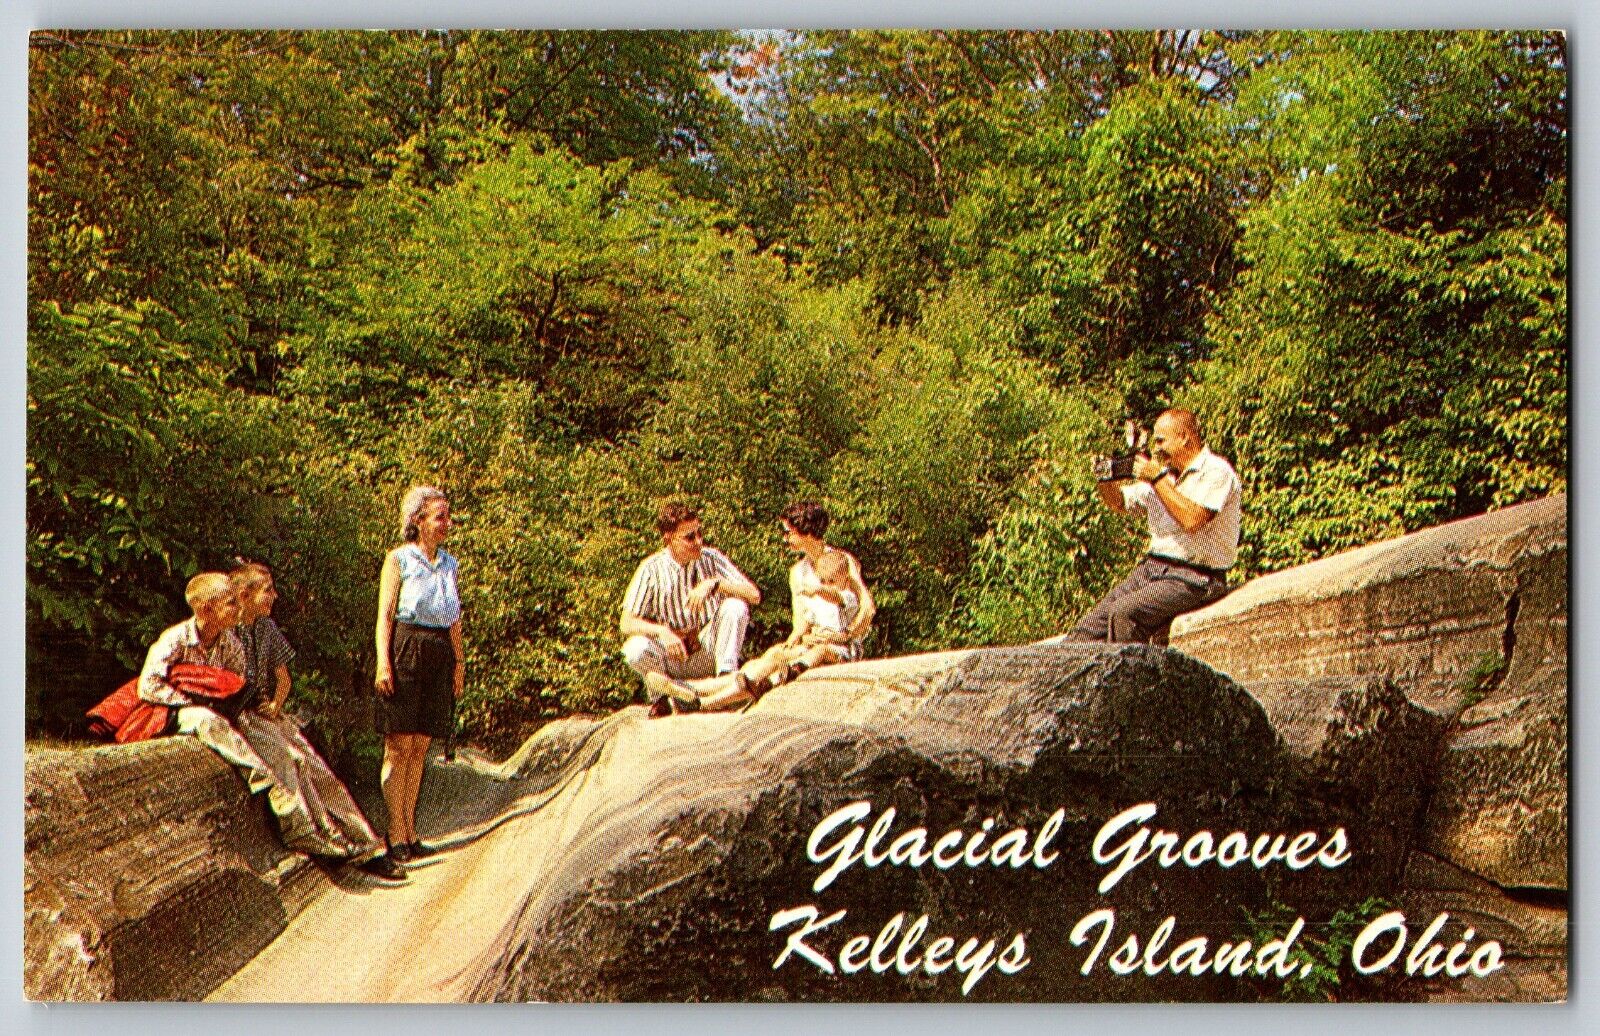 Kelley's Island, Ohio OH - The Glacial Grooves - Vintage Postcard - Unposted